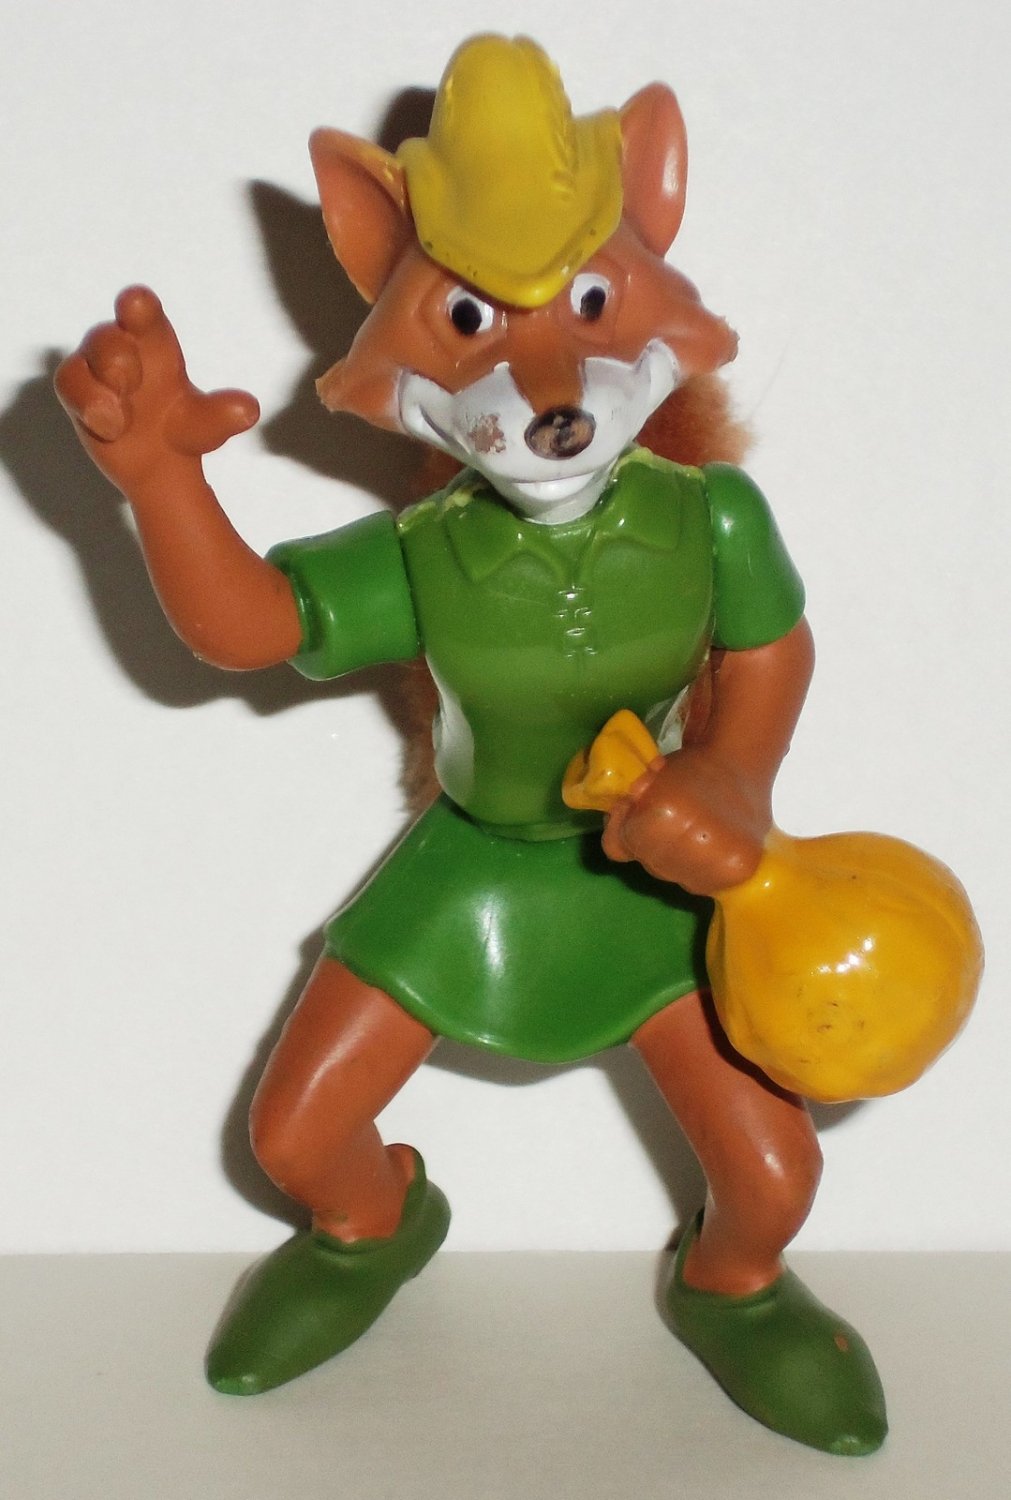 Mcdonalds 1996 Walt Disney Masterpiece Collection Robin Hood Yellow Bag Happy Meal Toy Loose Used